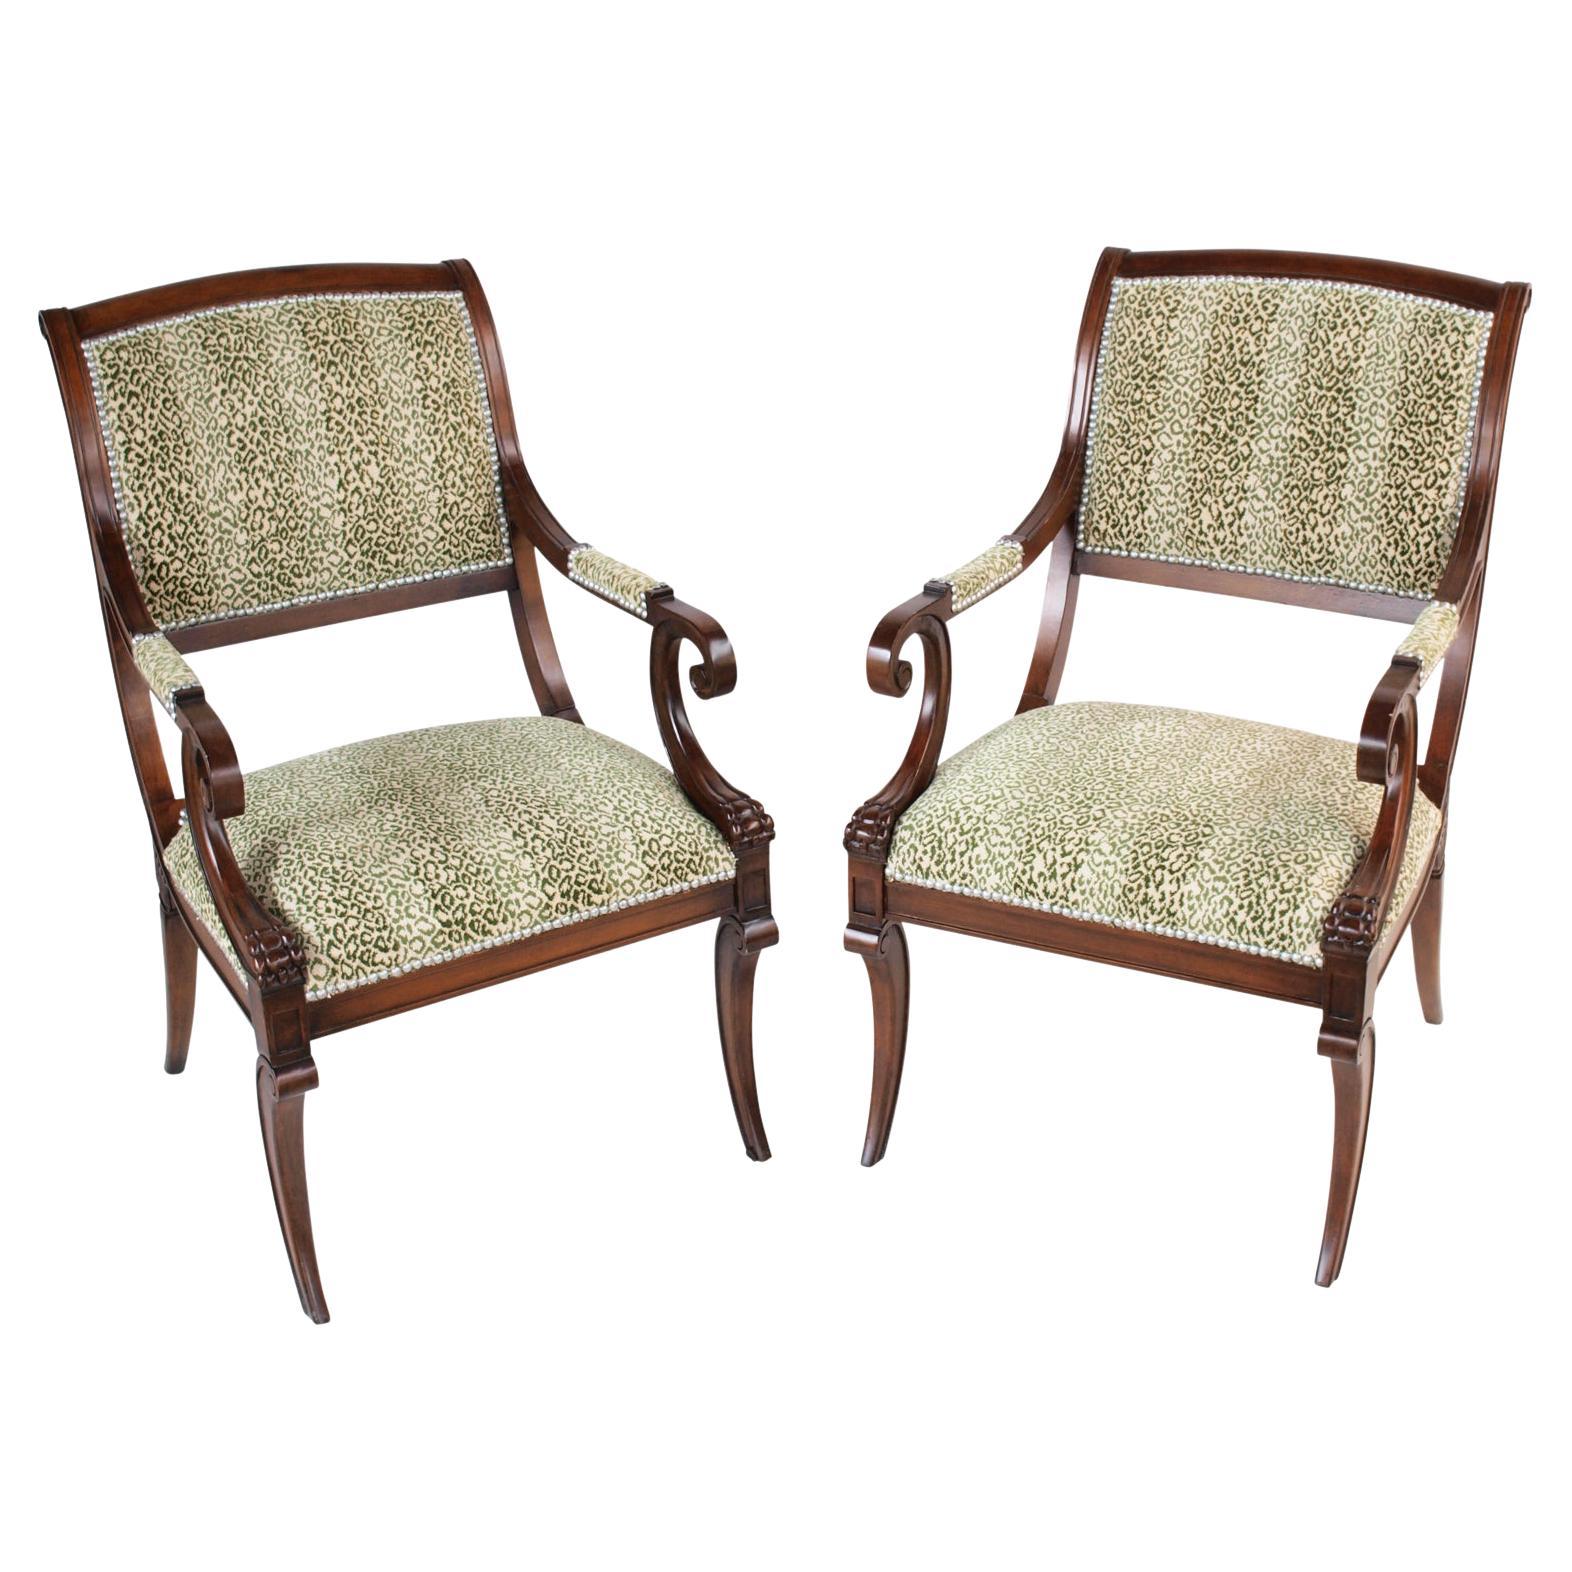 Pair of Vintage Mahogany English Regency Style Armchairs For Sale